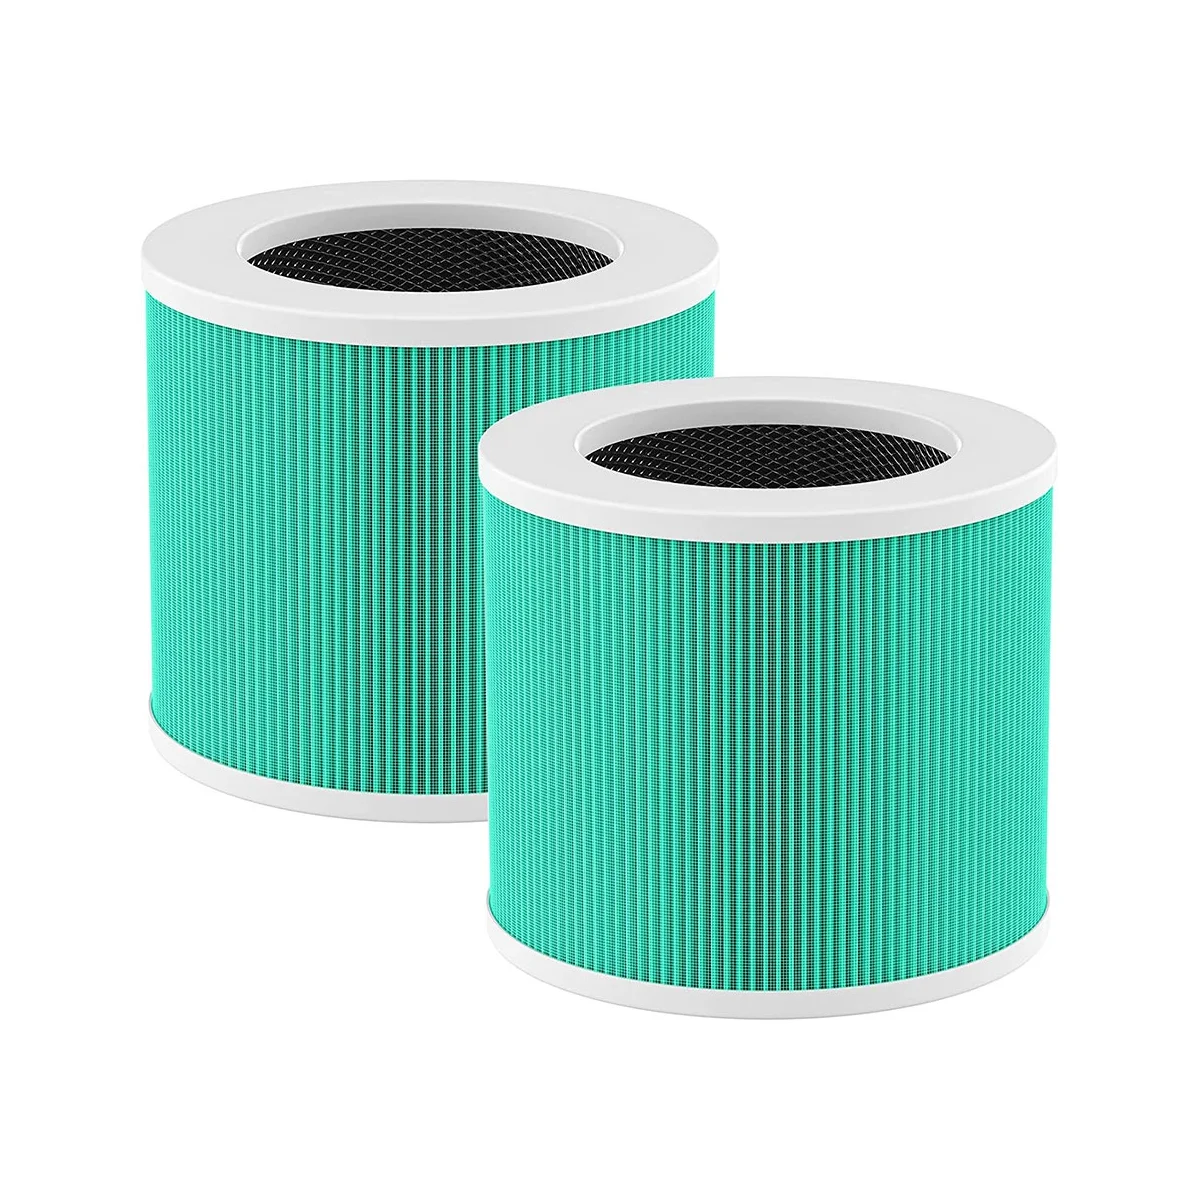 

2PCS HY1800 Replacement Filter for ///IOIOW Air Purifier, H13 Ture HEPA HY1800 Filter